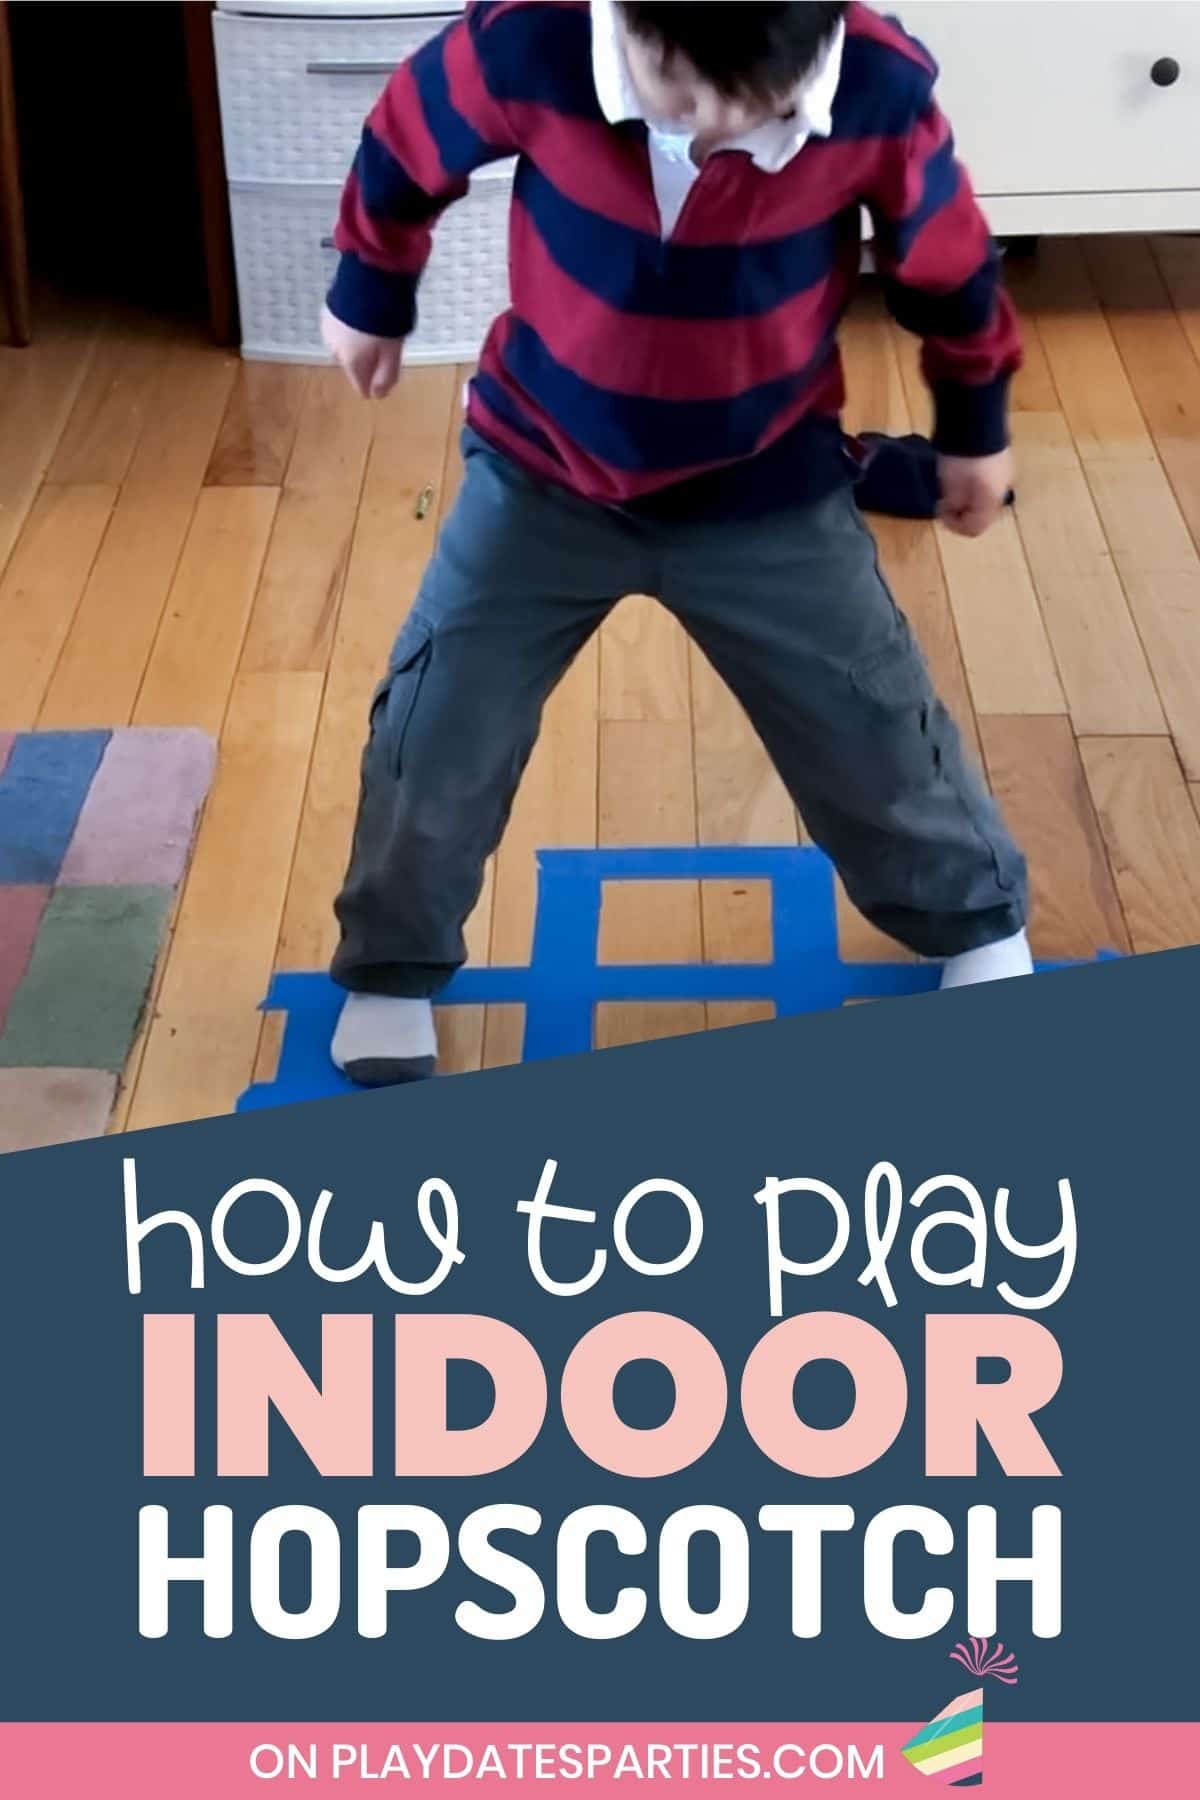 photo of a young boy jumping on a wooden floor with text overlay how to play indoor hopscotch